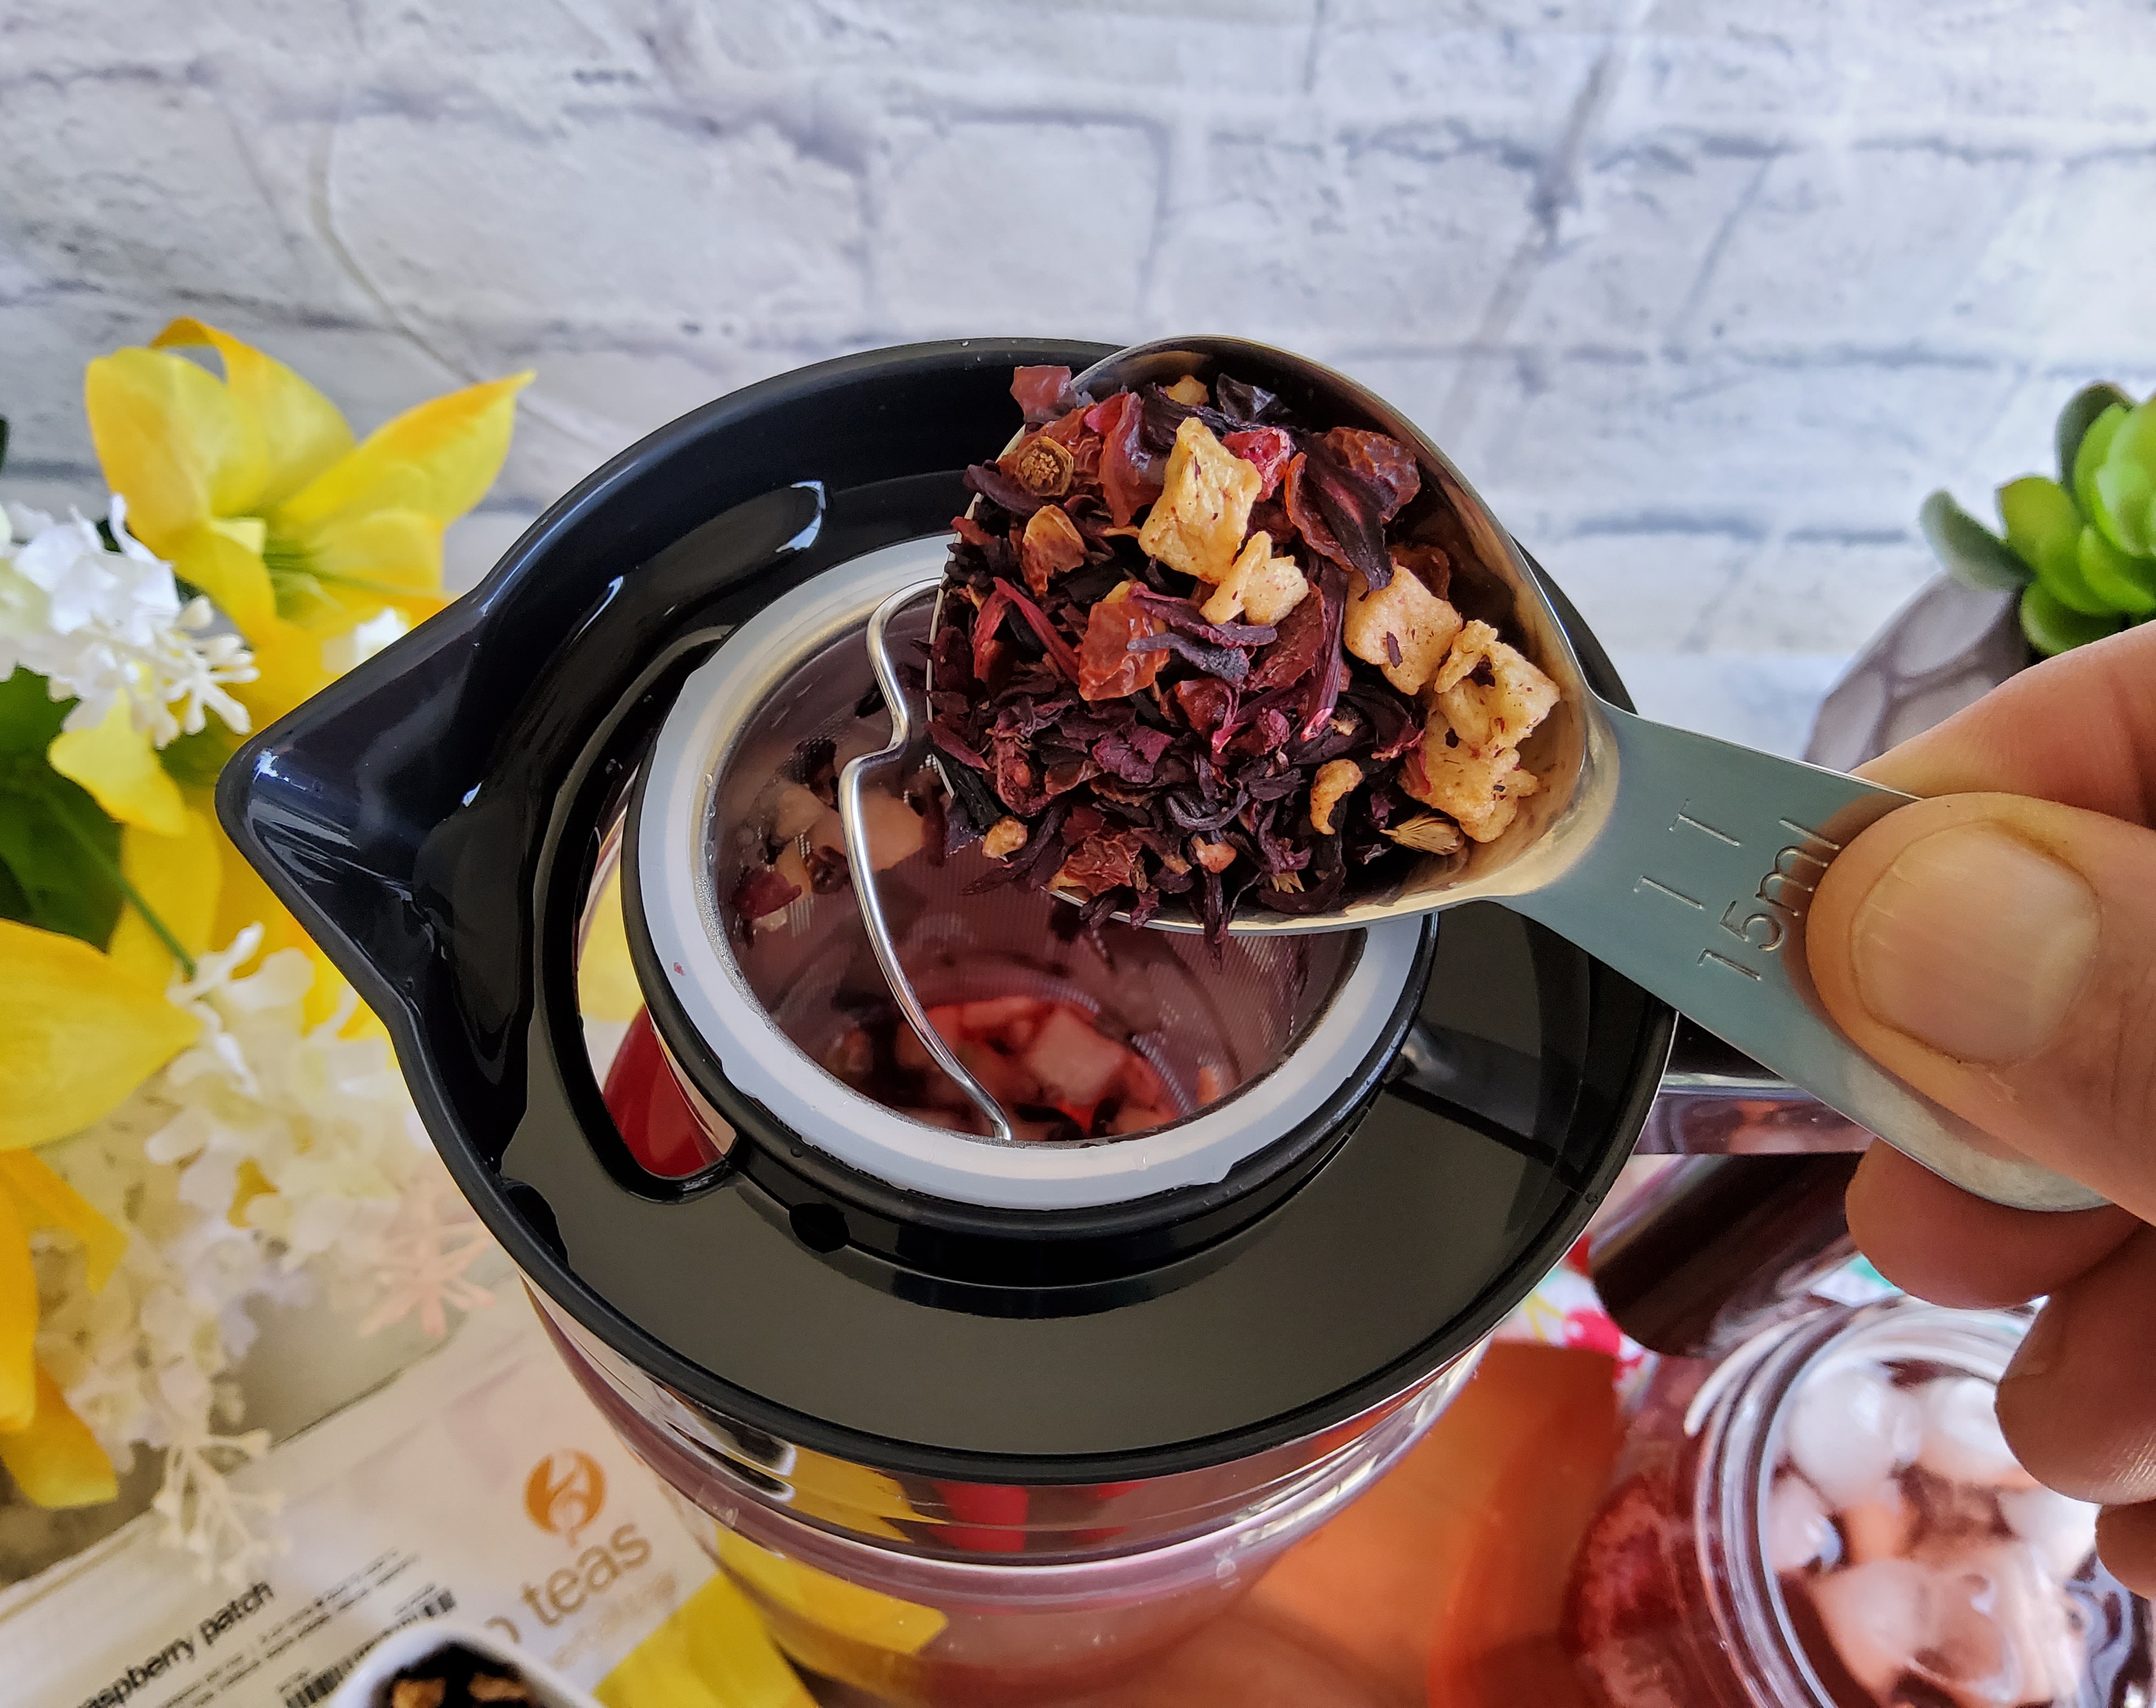 How to Brew a Perfect Pitcher of Iced Tea? - Fusion Teas Blog